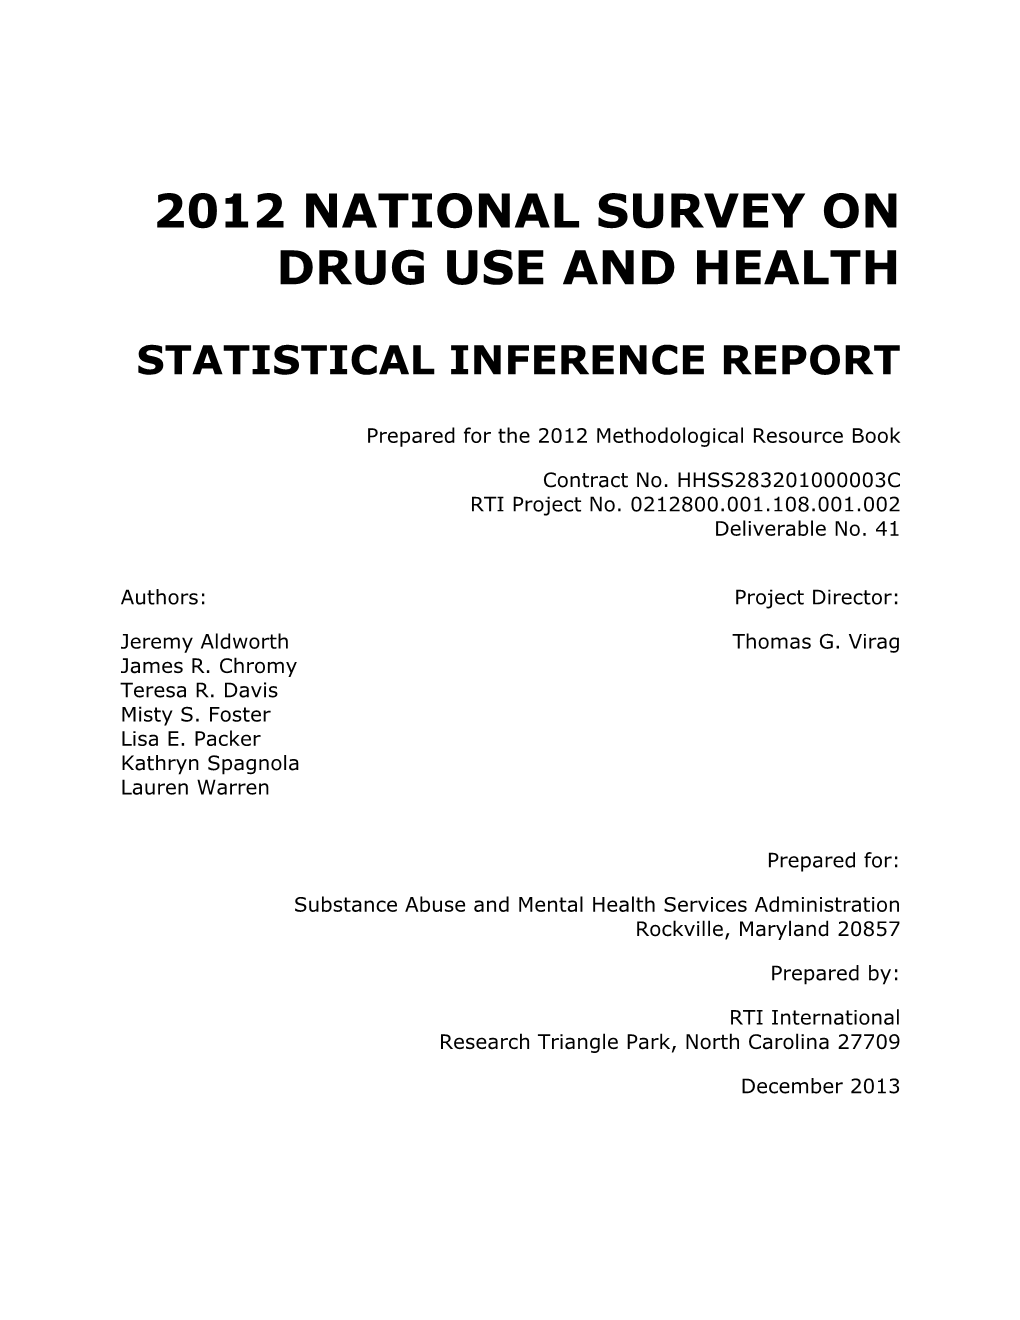 NSDUH MRB 2012 Statistical Inference Report